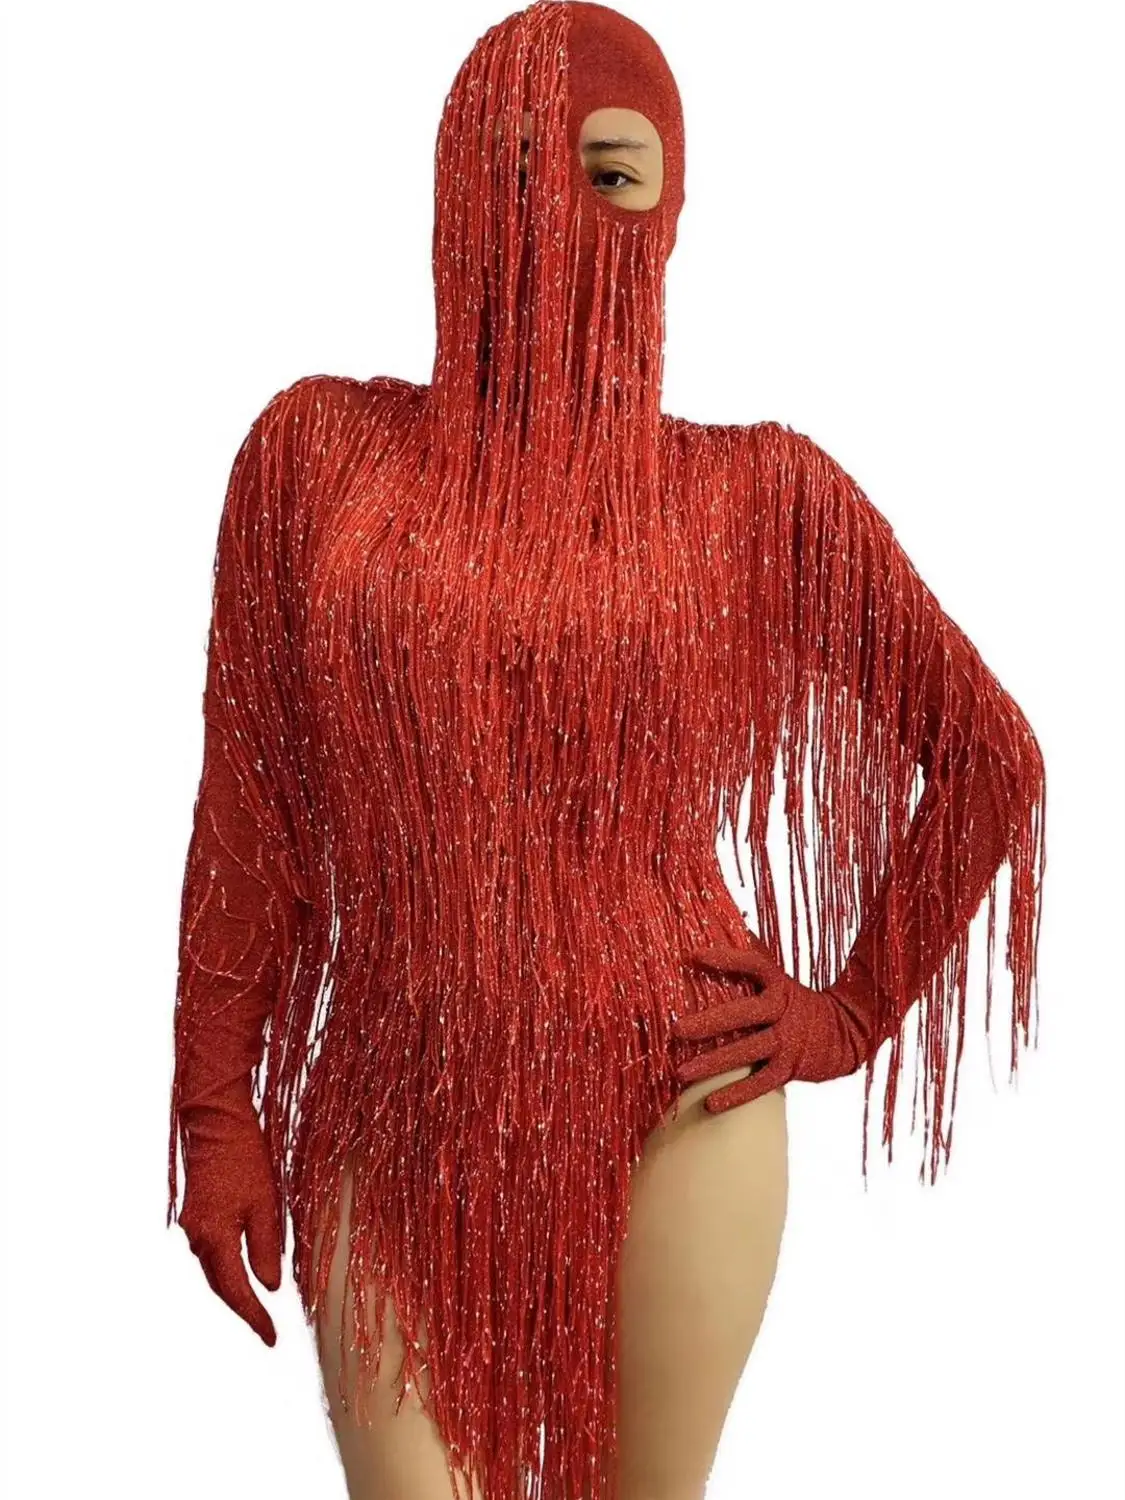 Masked Headdress Long Tassel Bodysuit Women Sexy Stretch Fringes Stage Leotard Halloween Cosplay Costumes Performance Outfits